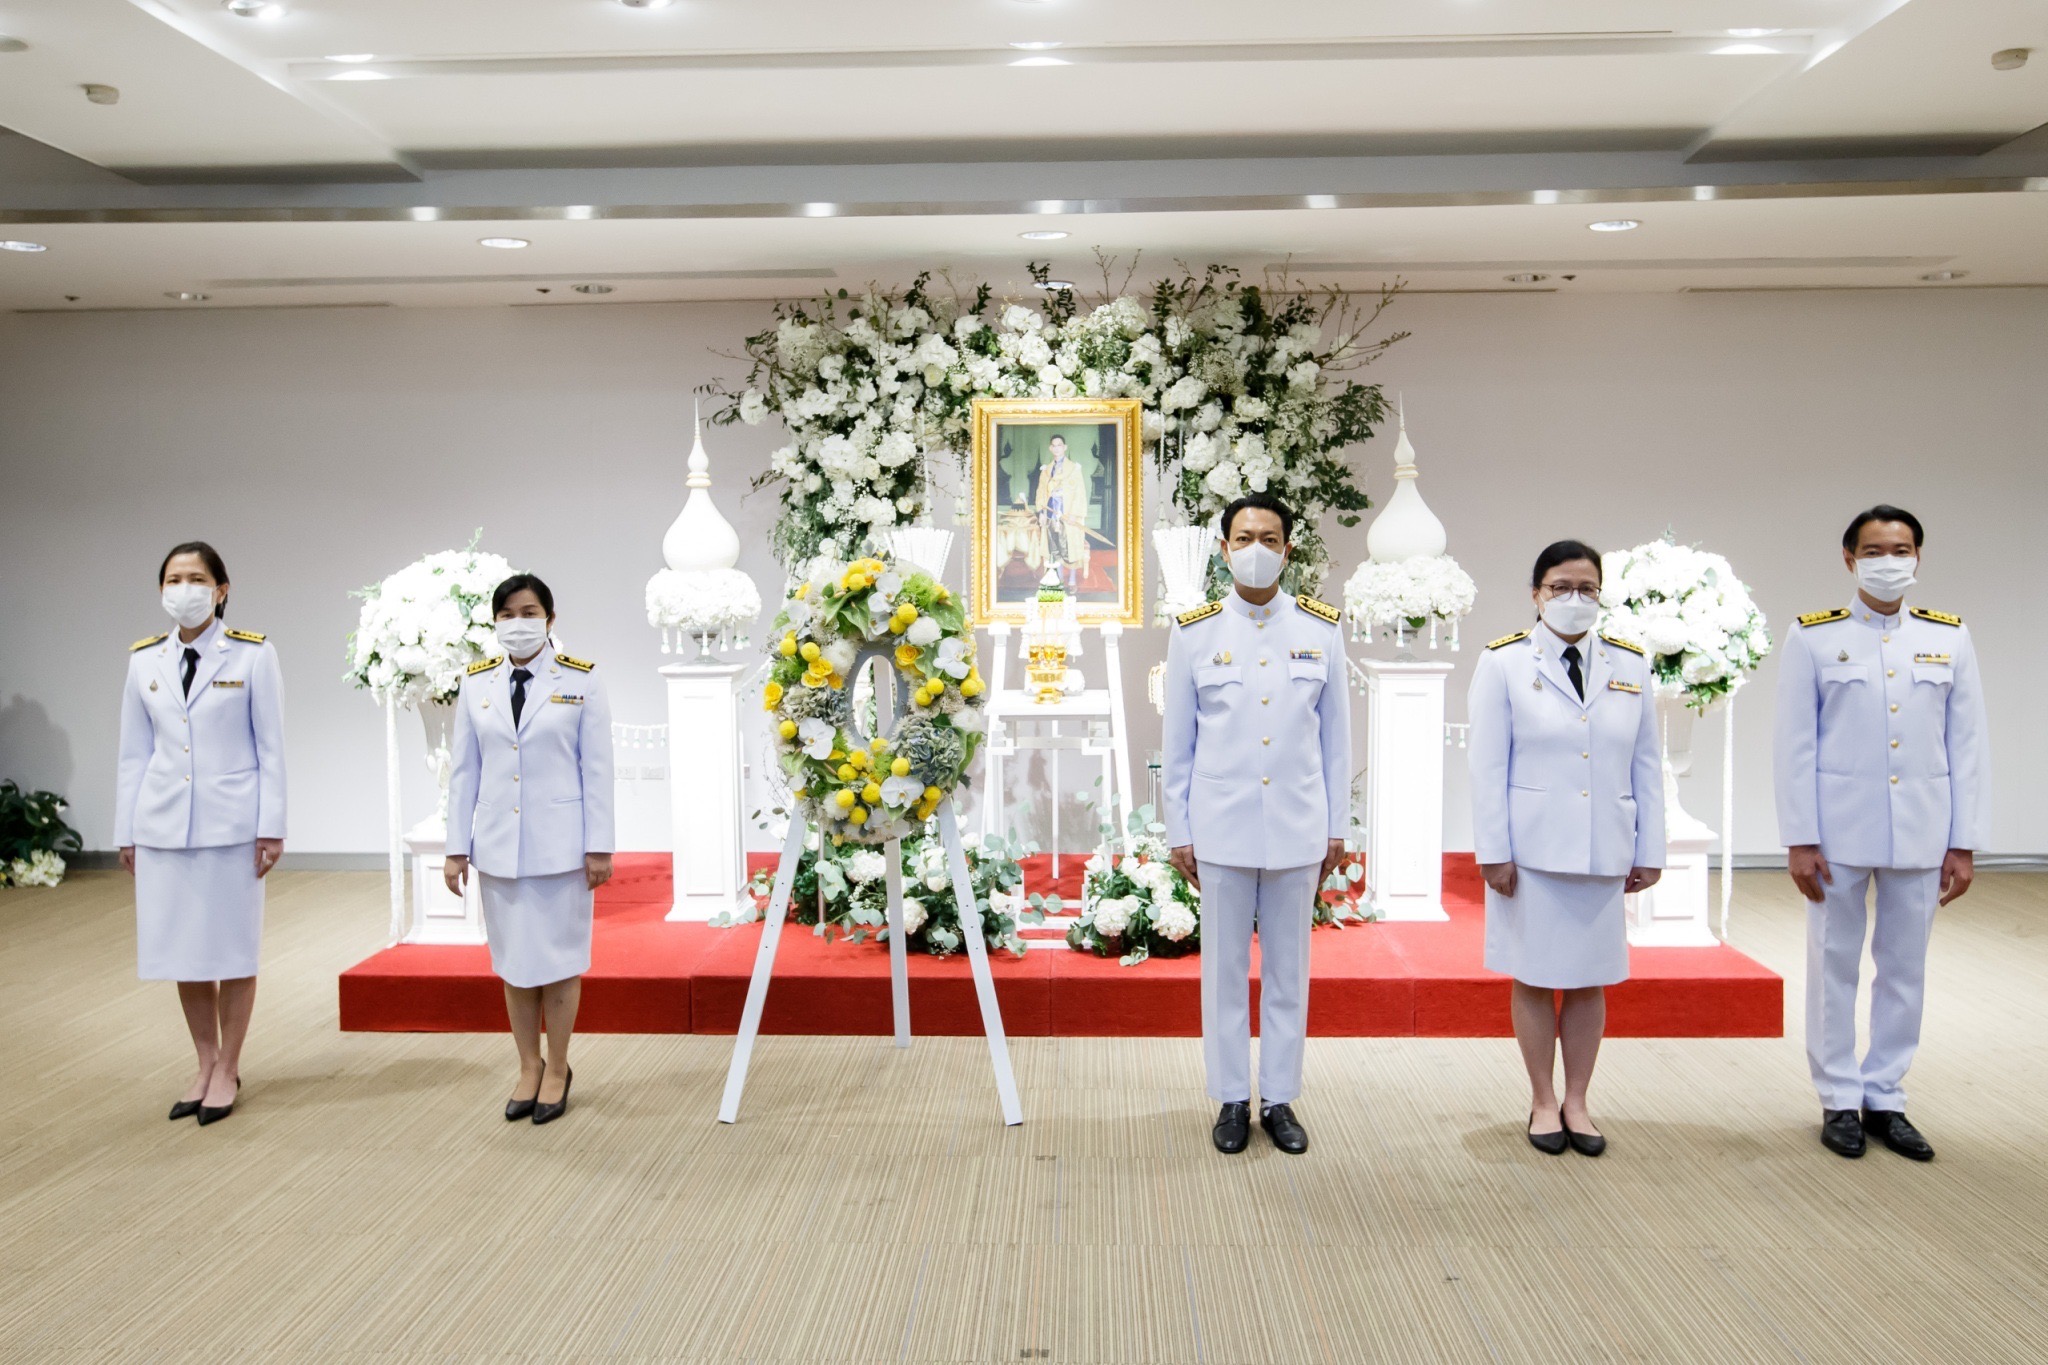 EXIM Thailand Holds Wreath laying Ceremony in Tribute of His Majesty King Bhumibol Adulyadej the Great